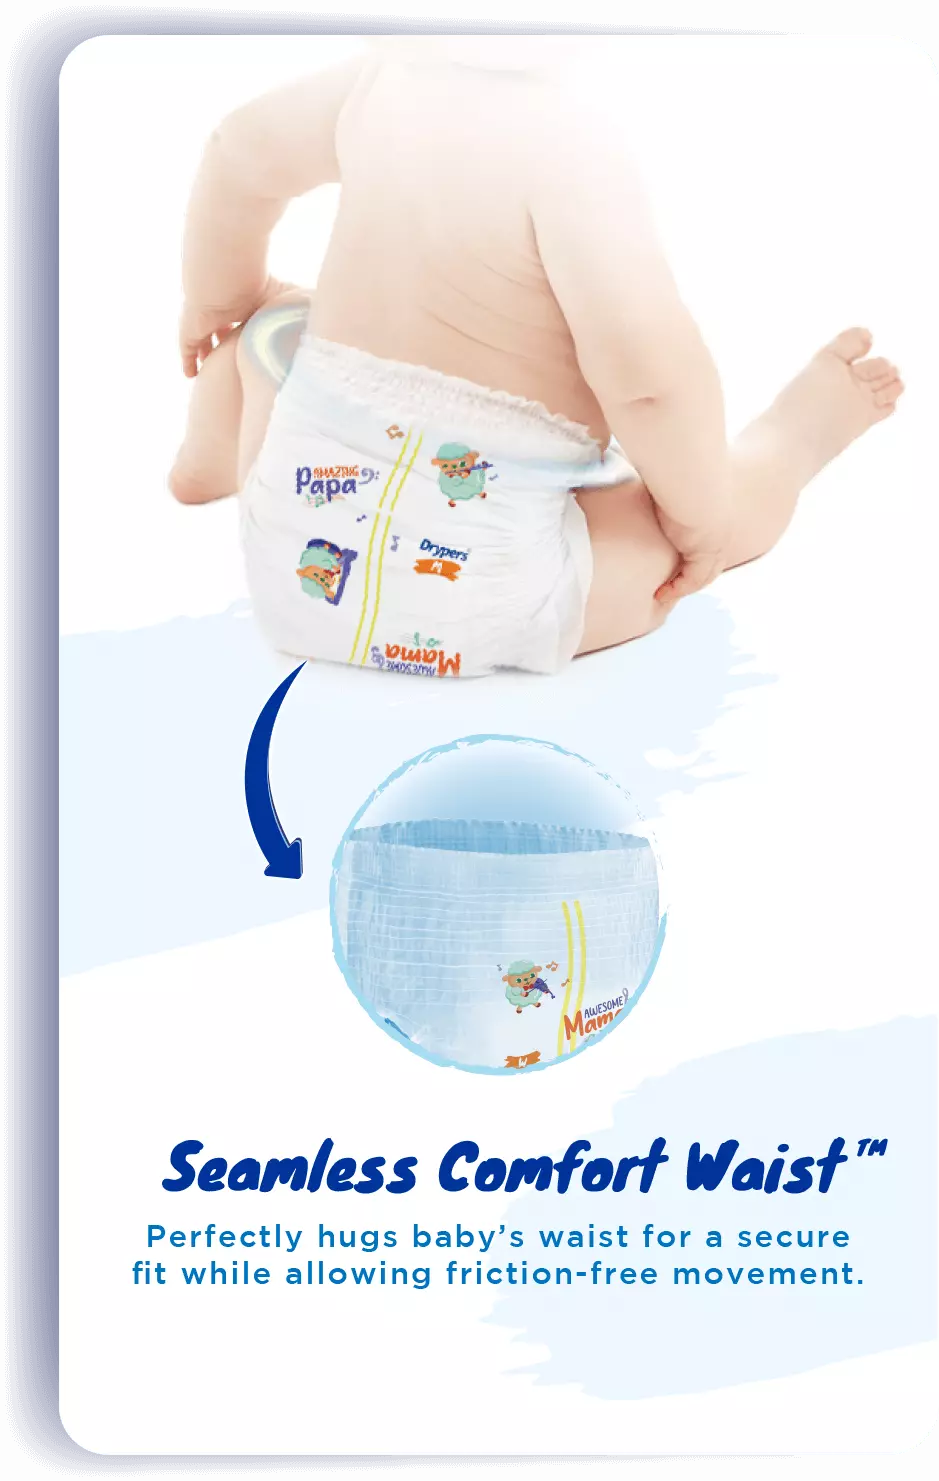 Seamless Comfort Waist™: Perfectly hugs baby's waist for a secure fit while allowing friction-free movement.